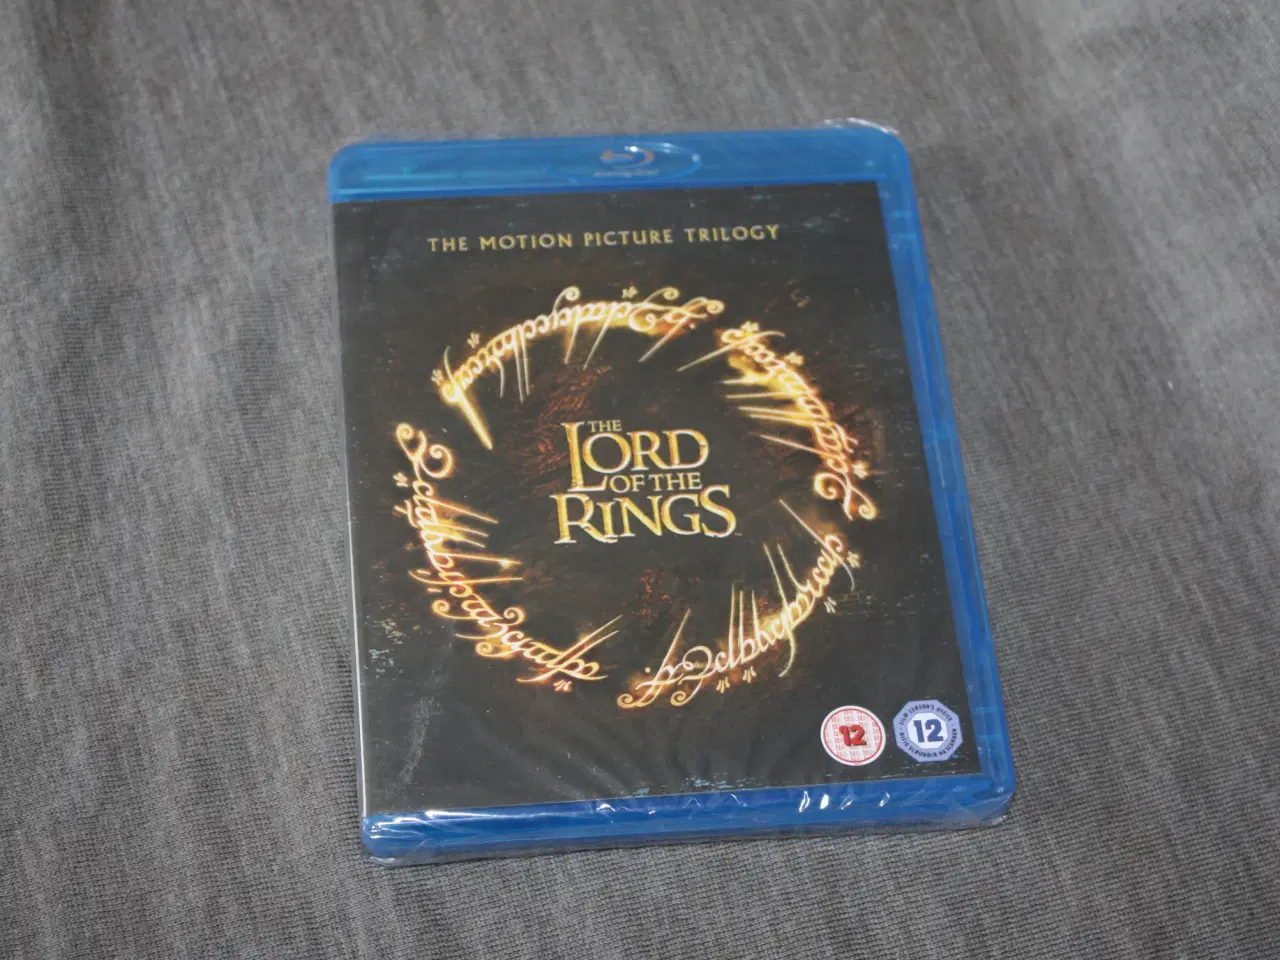 Billede 1 - The Lord of The Rings Blu-ray